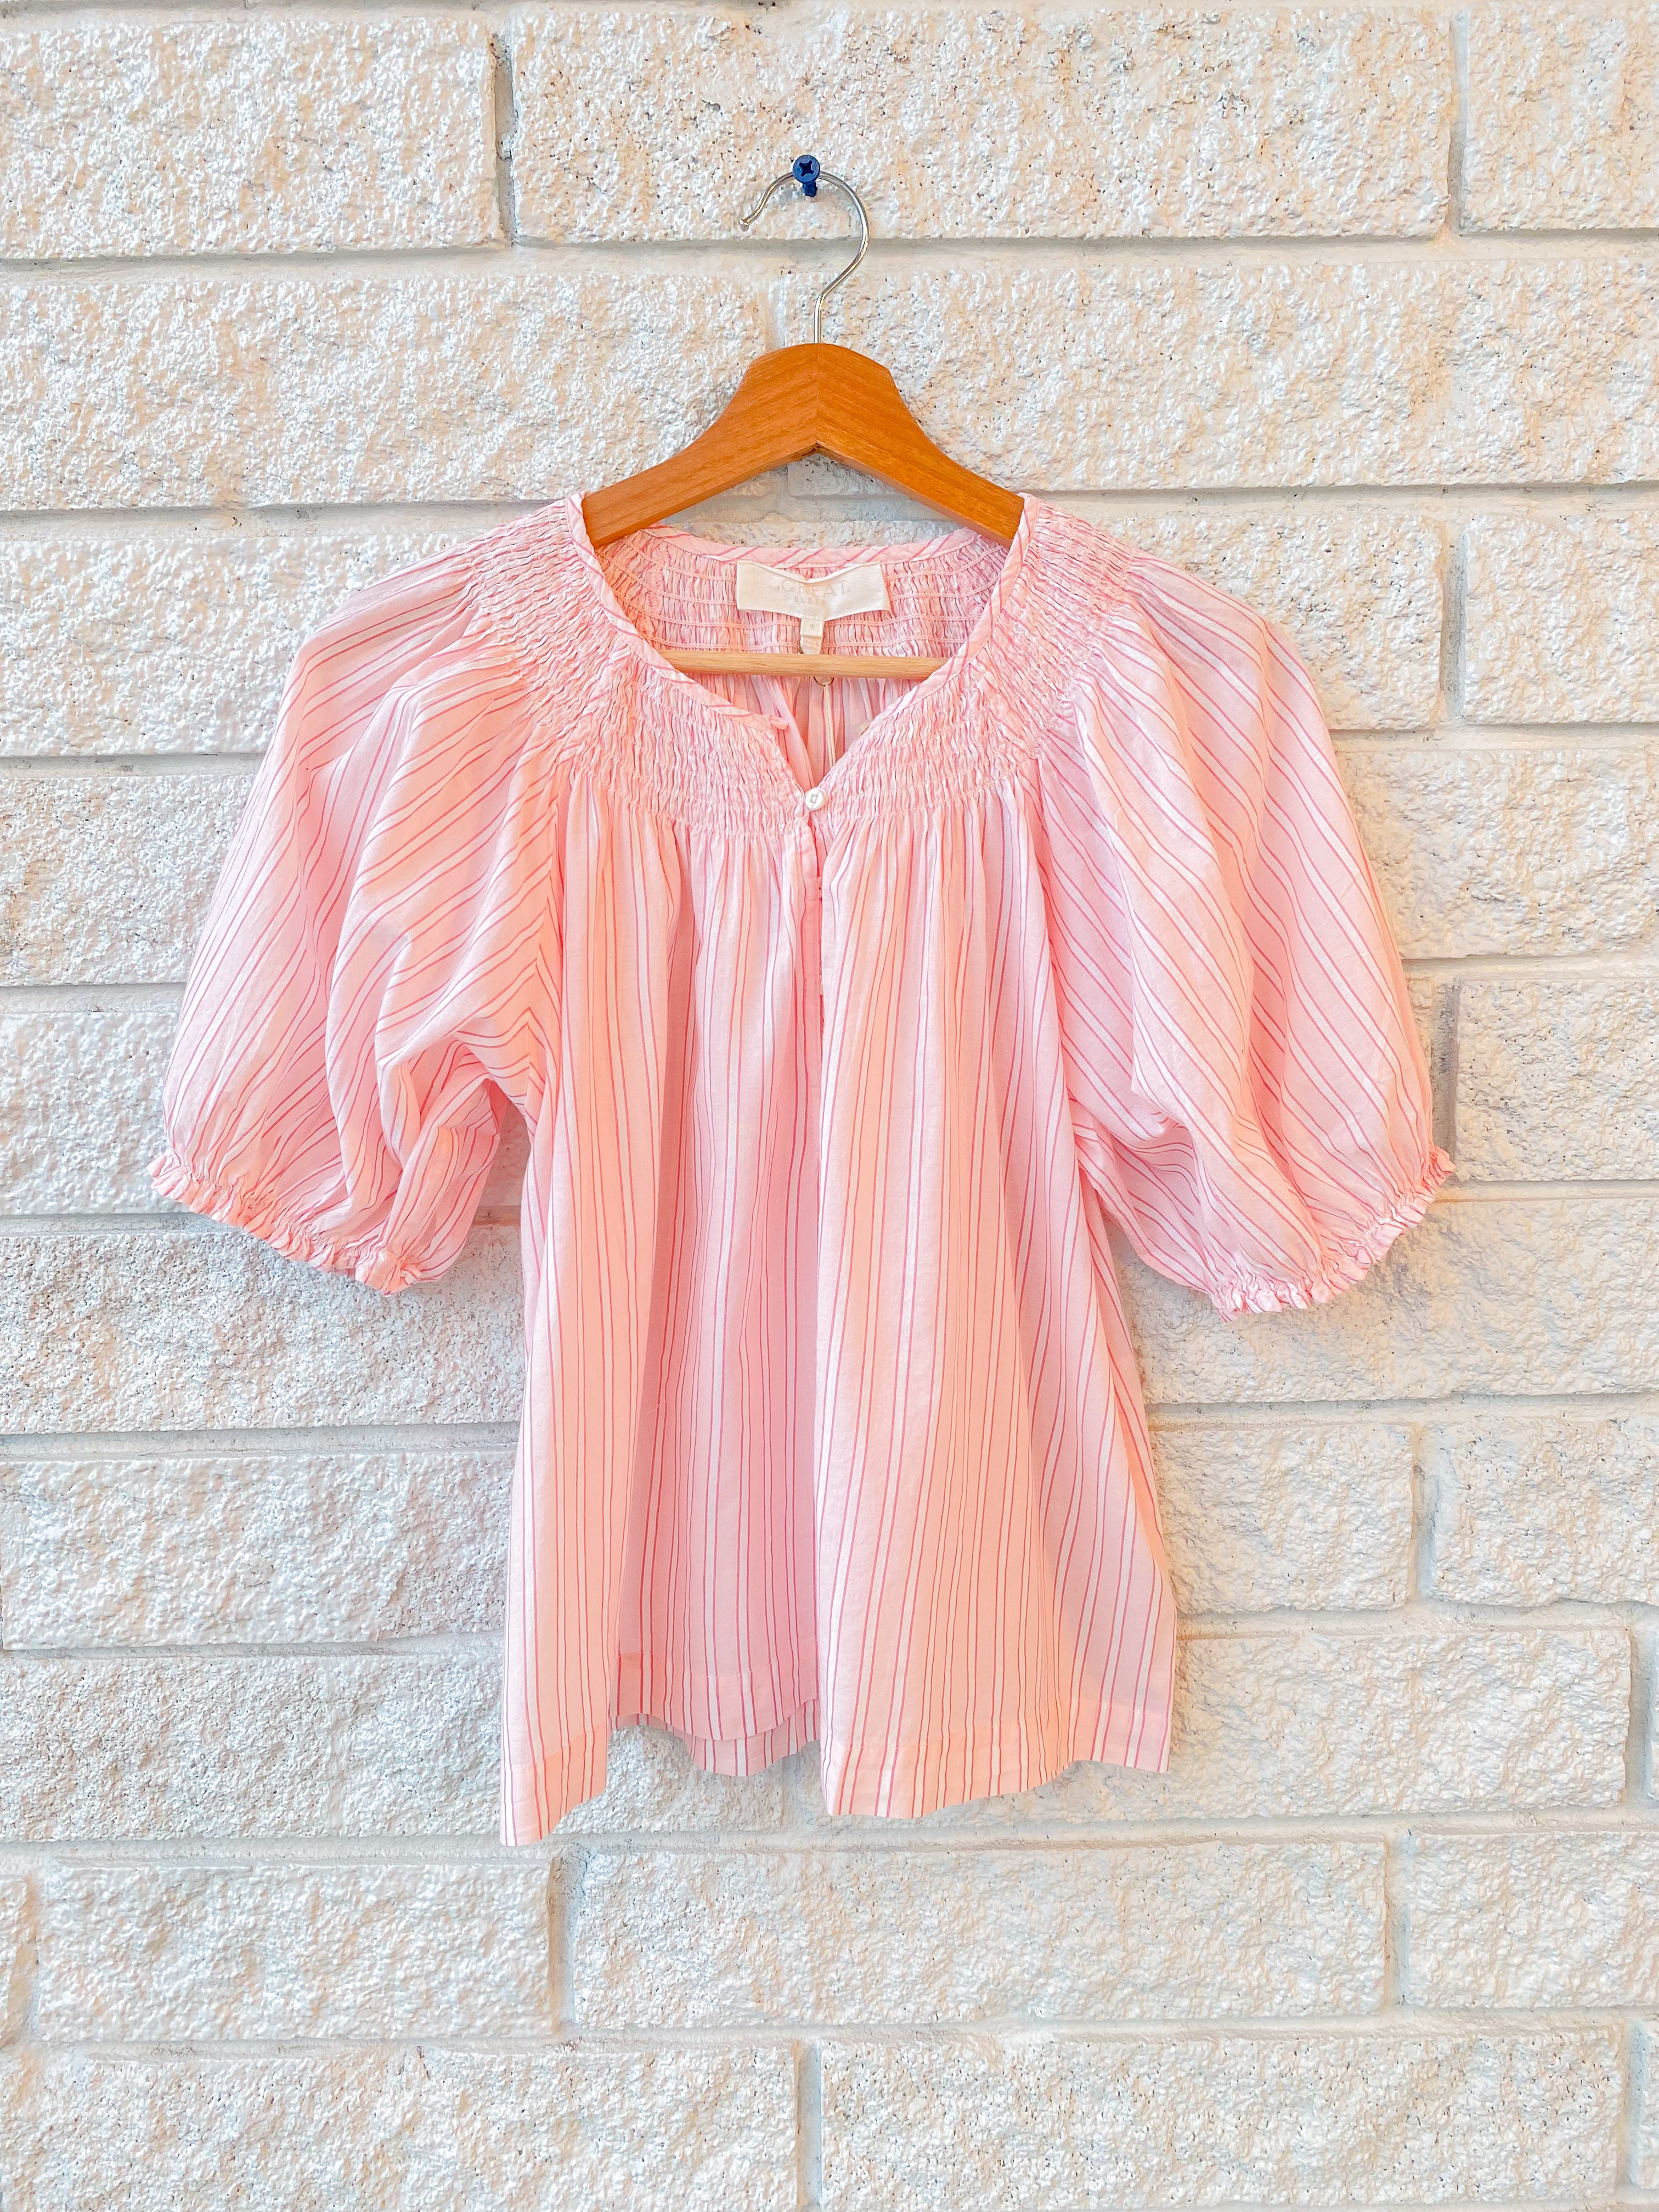 The Smocked Top